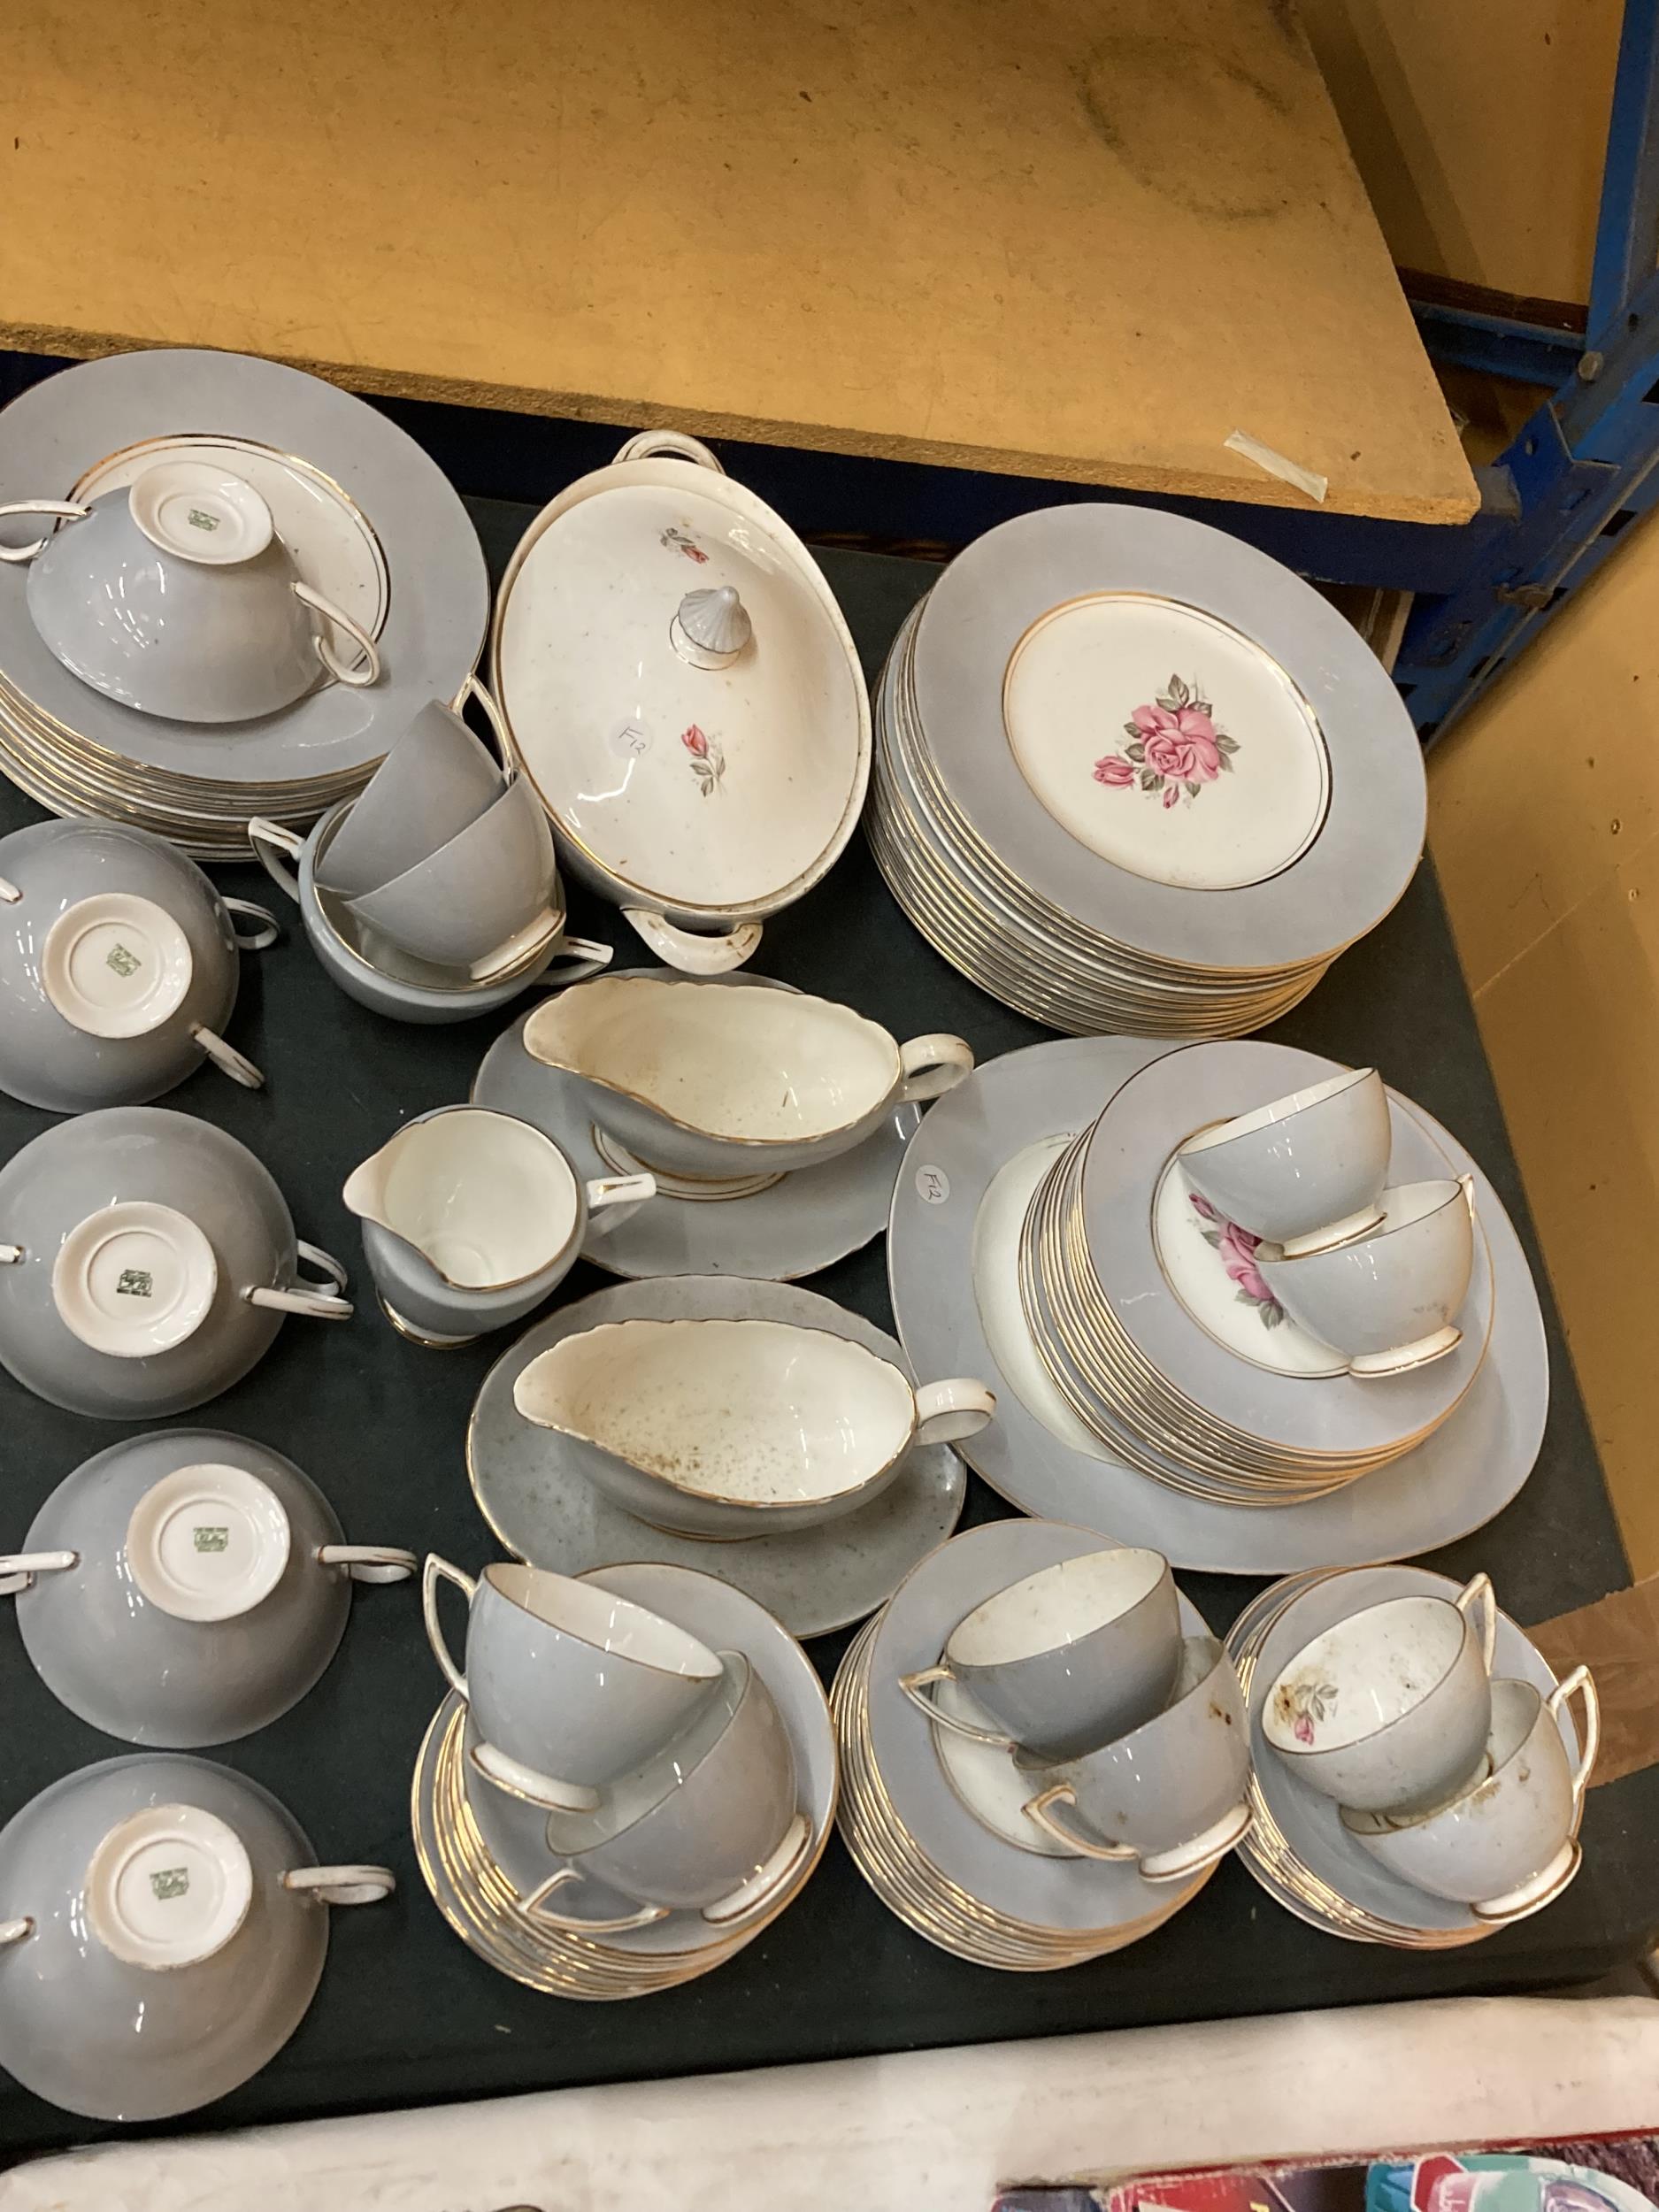 A LARGE QUANTITY OF SHELLEY DINNERWARE IN GREY WITH A PINK ROSE DECORATION TO INCLUDE VARIOUS